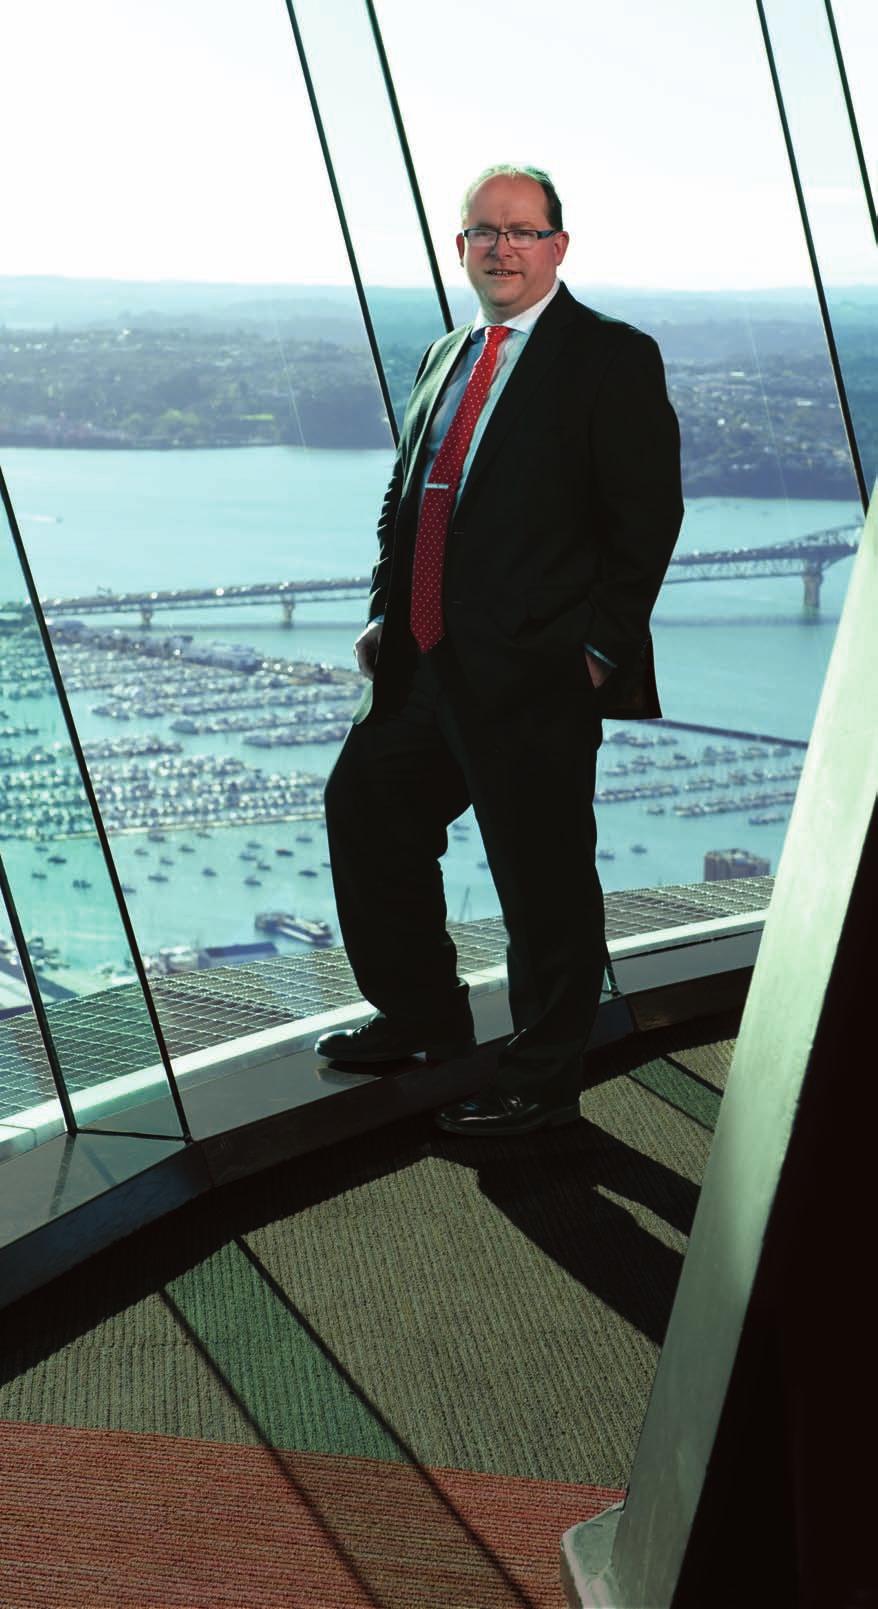 The key to successfully navigating tougher times is to read the signs and respond decisively according to Simon Jamieson, General Manager, SKYCITY Hotels Group Auckland.